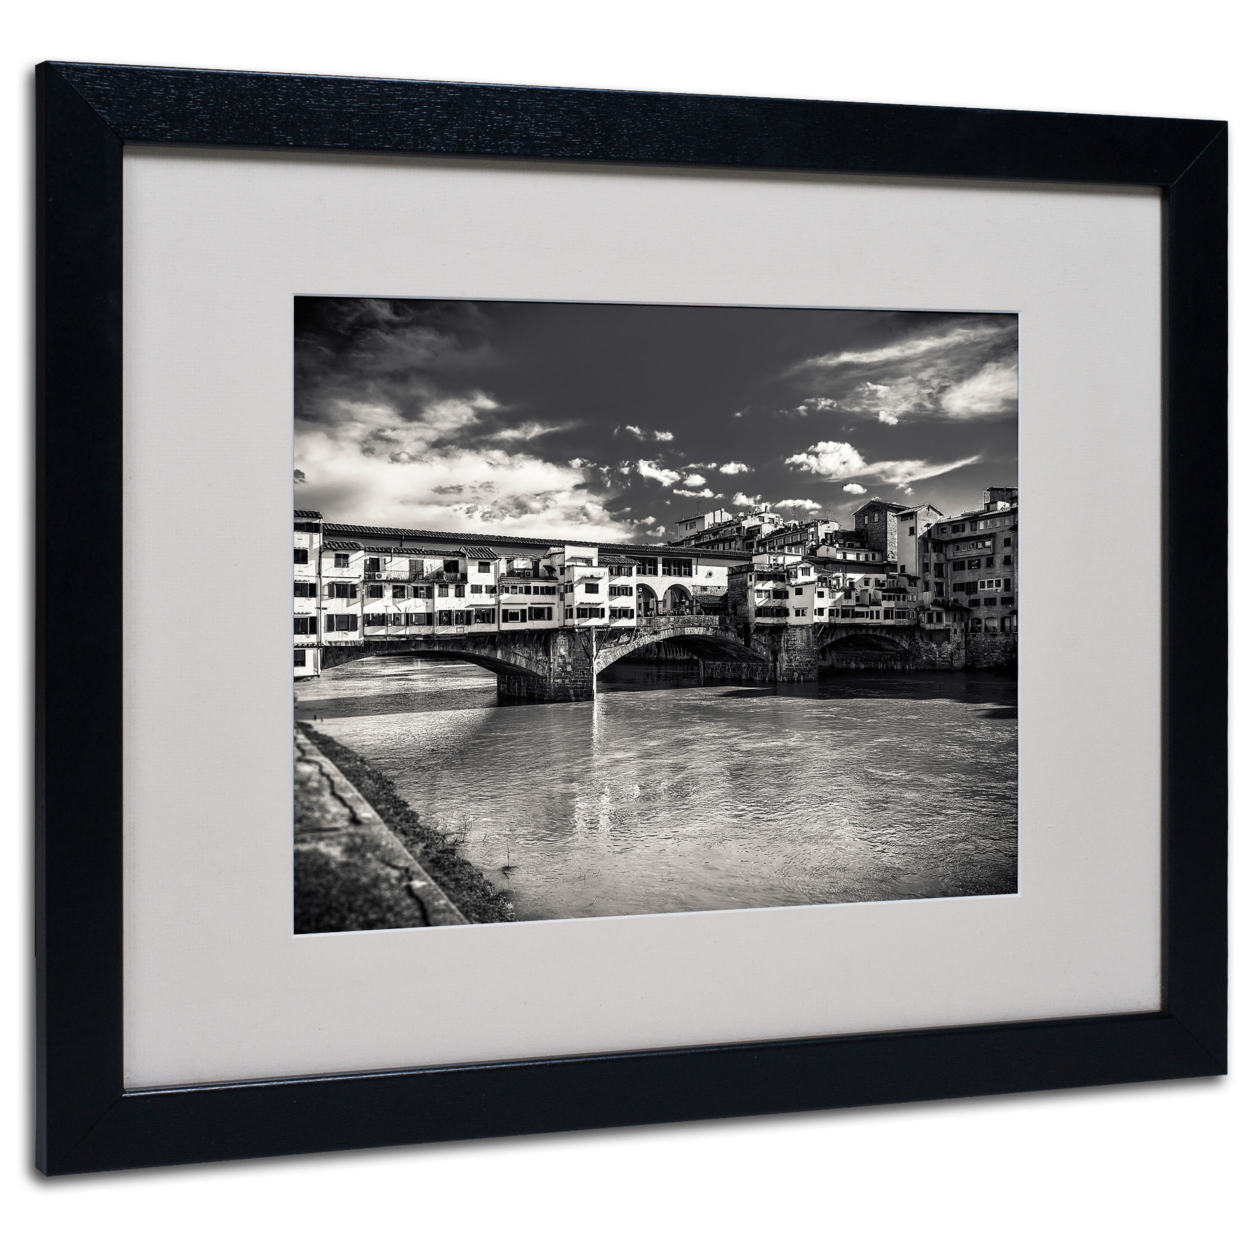 Giuseppe Torre 'Letters From Florence' Black Wooden Framed Art 18 X 22 Inches